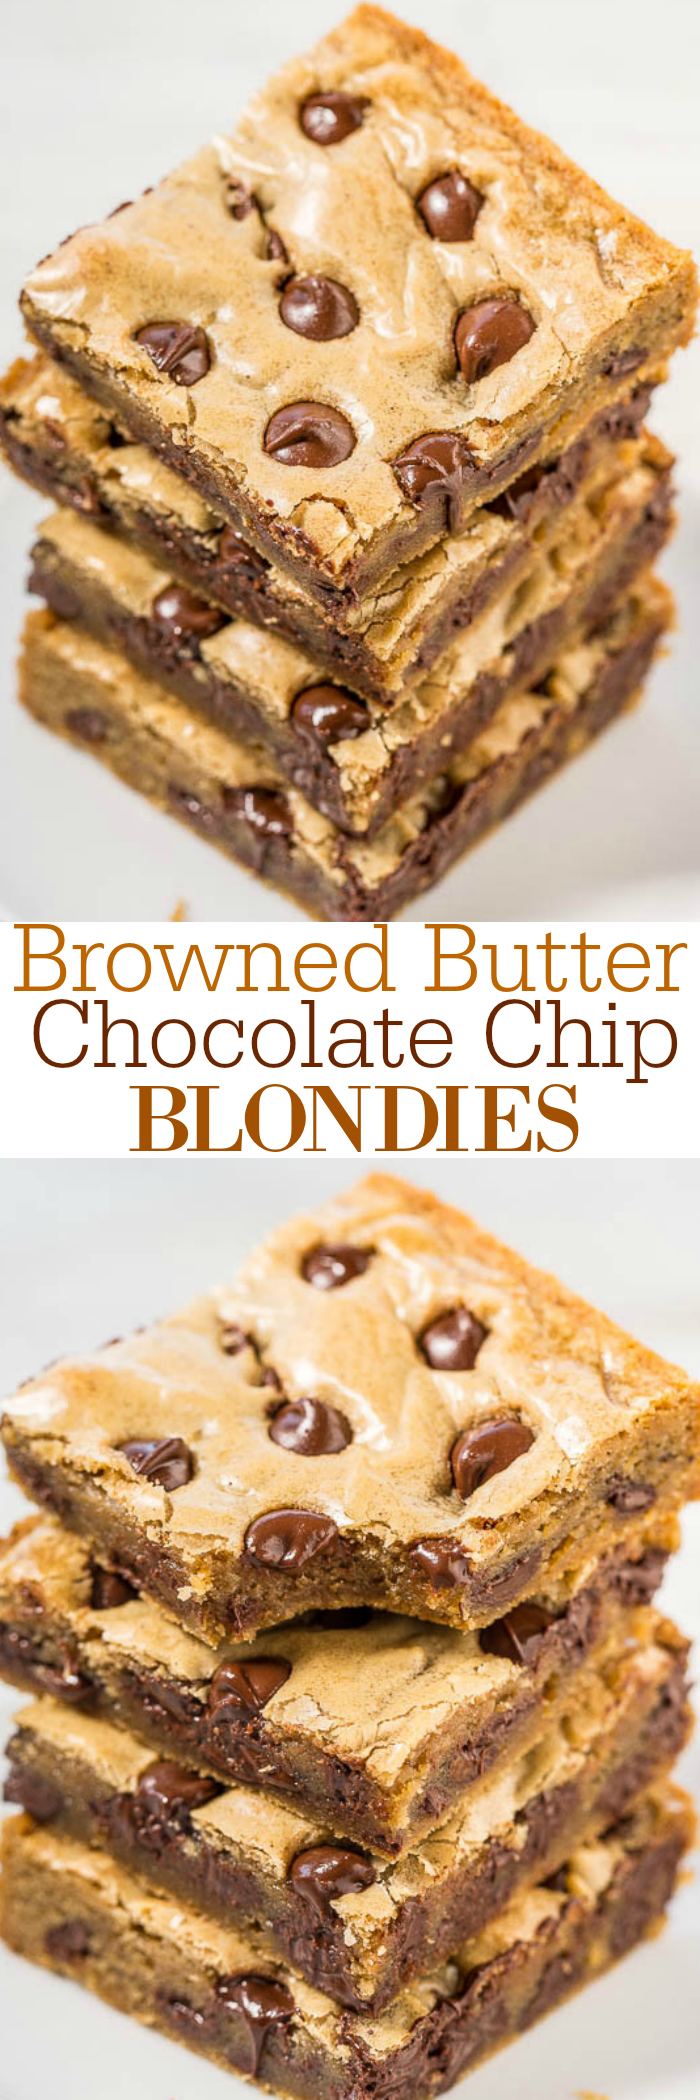 Browned Butter Chocolate Chip Blondies - Super soft, slightly chewy, loaded with chocolate chips, and the browned butter takes them to the next level!! Fast, easy, no-mixer recipe that you HAVE to try!!